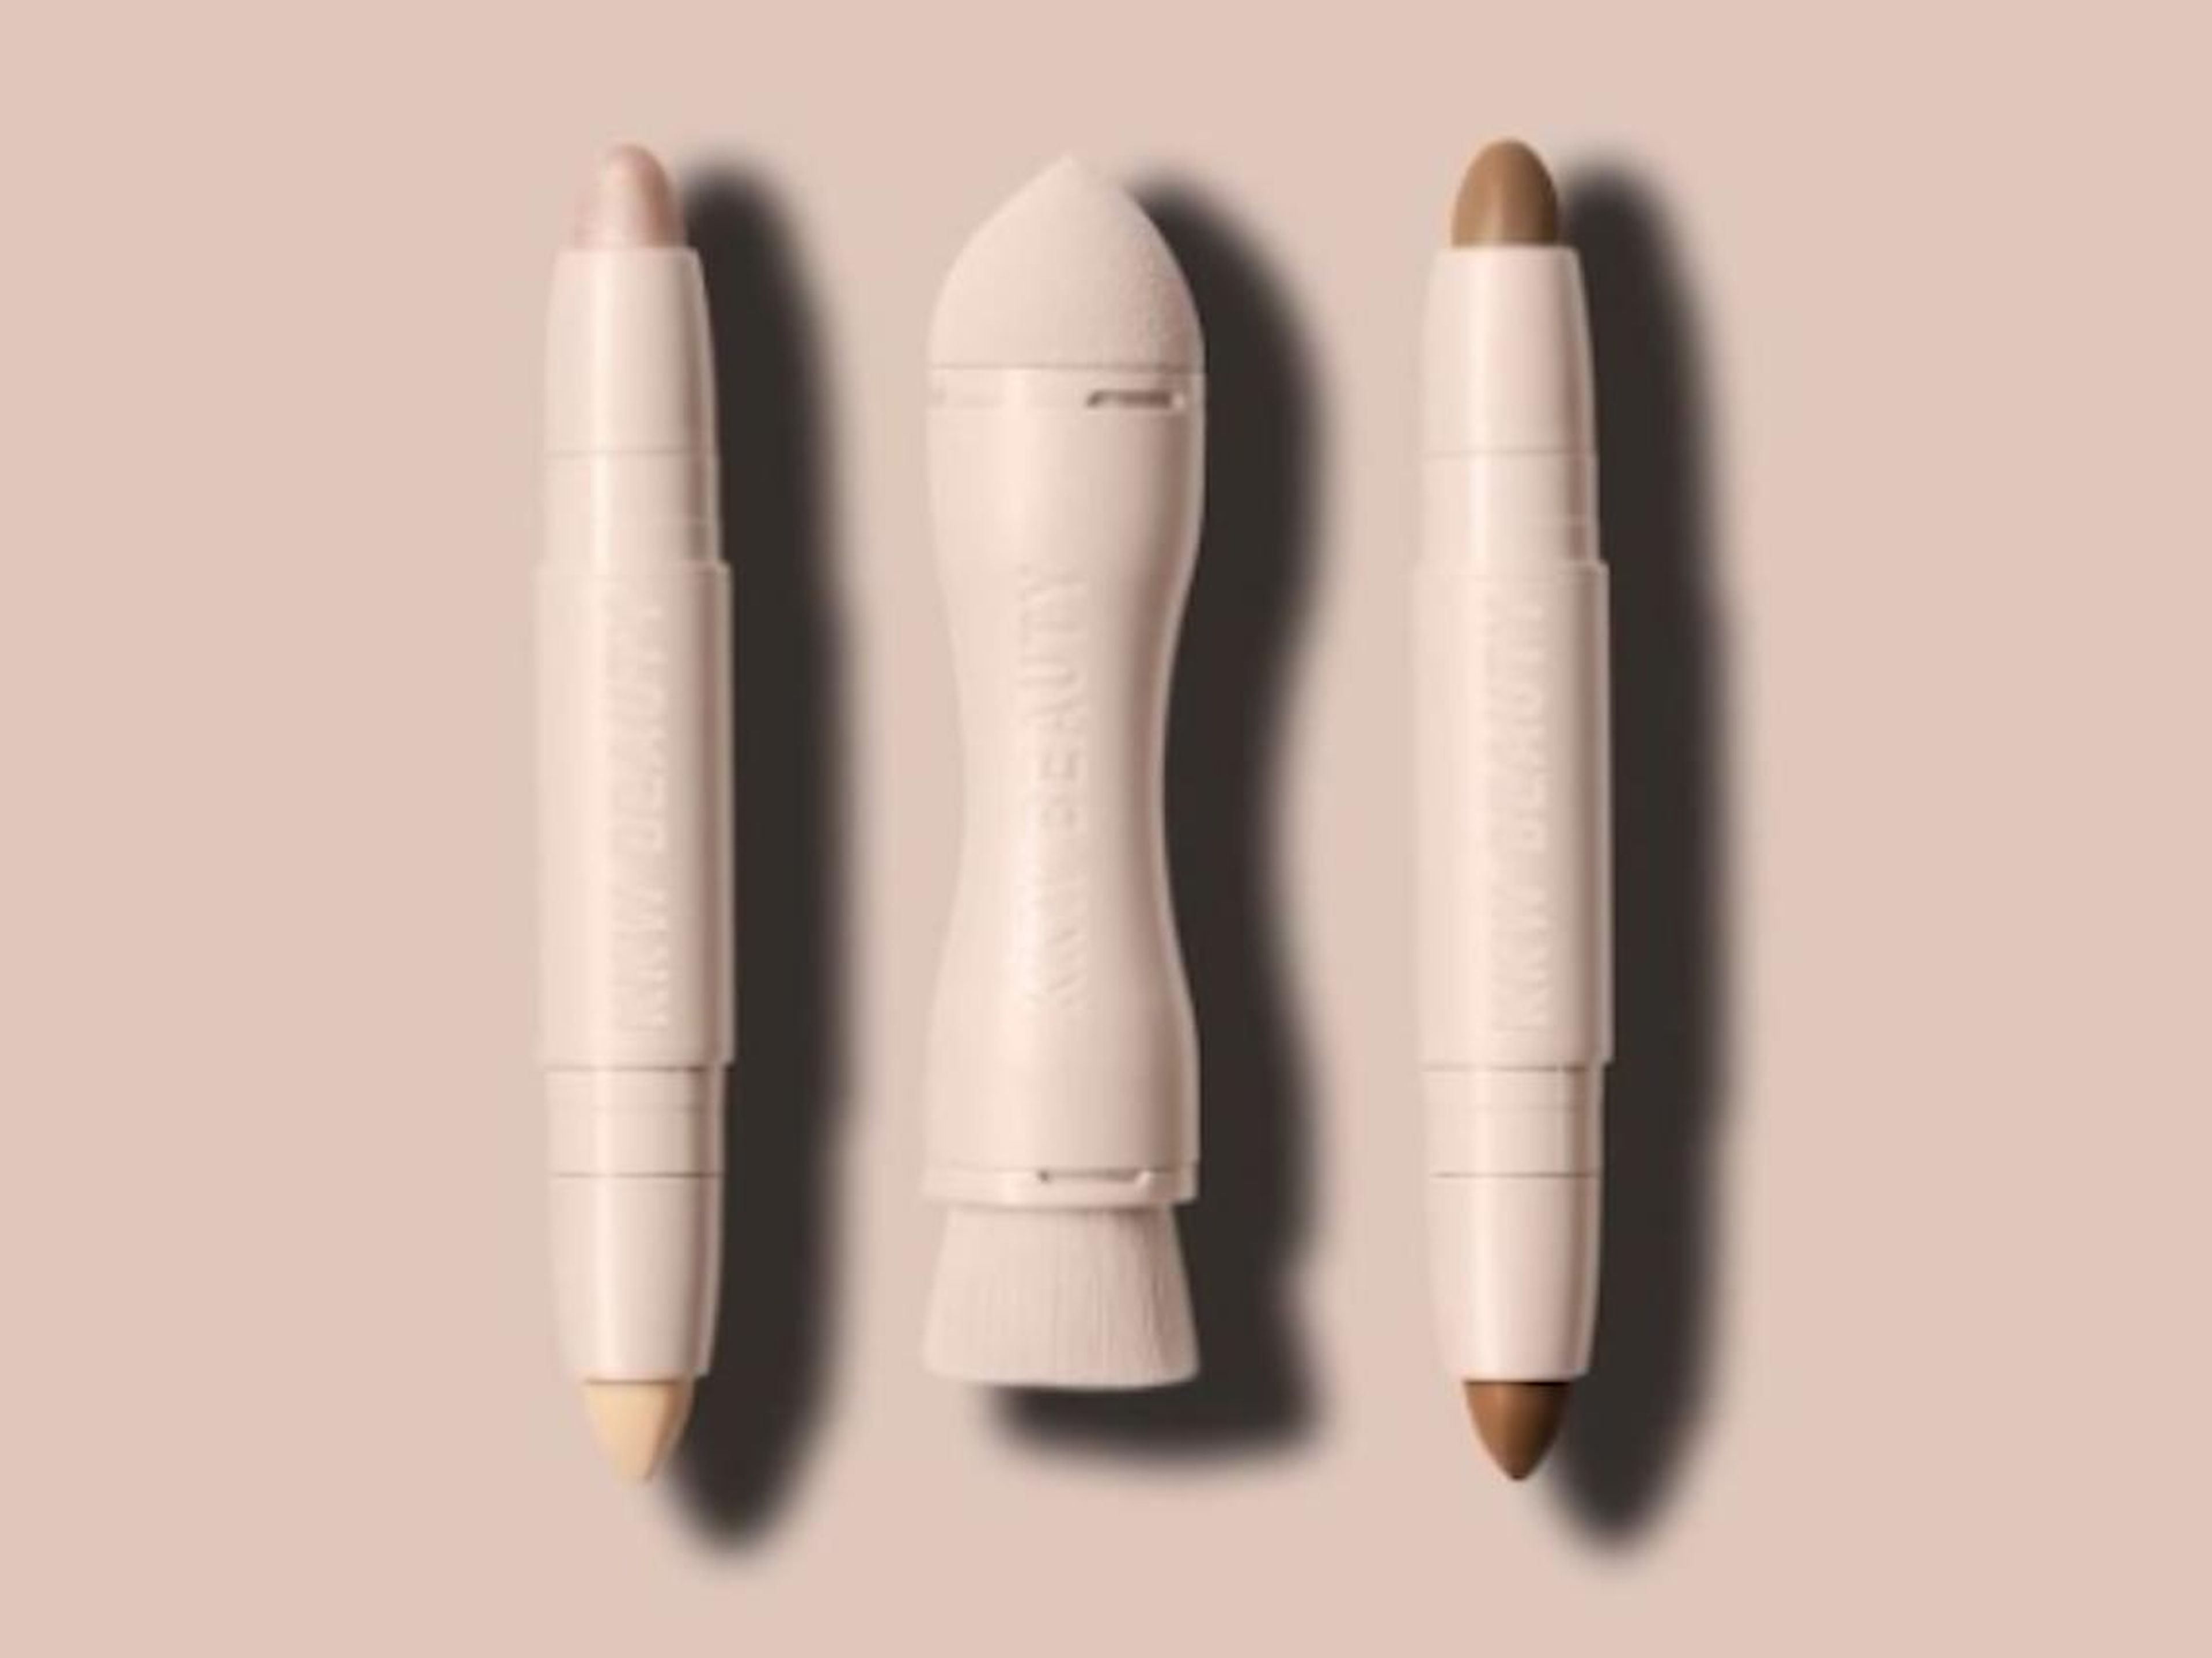 Kim got back into the beauty business with KKW Beauty in 2017. The first product: a $48 contour kit that sold out in minutes and racked up more than $13 million in sales.